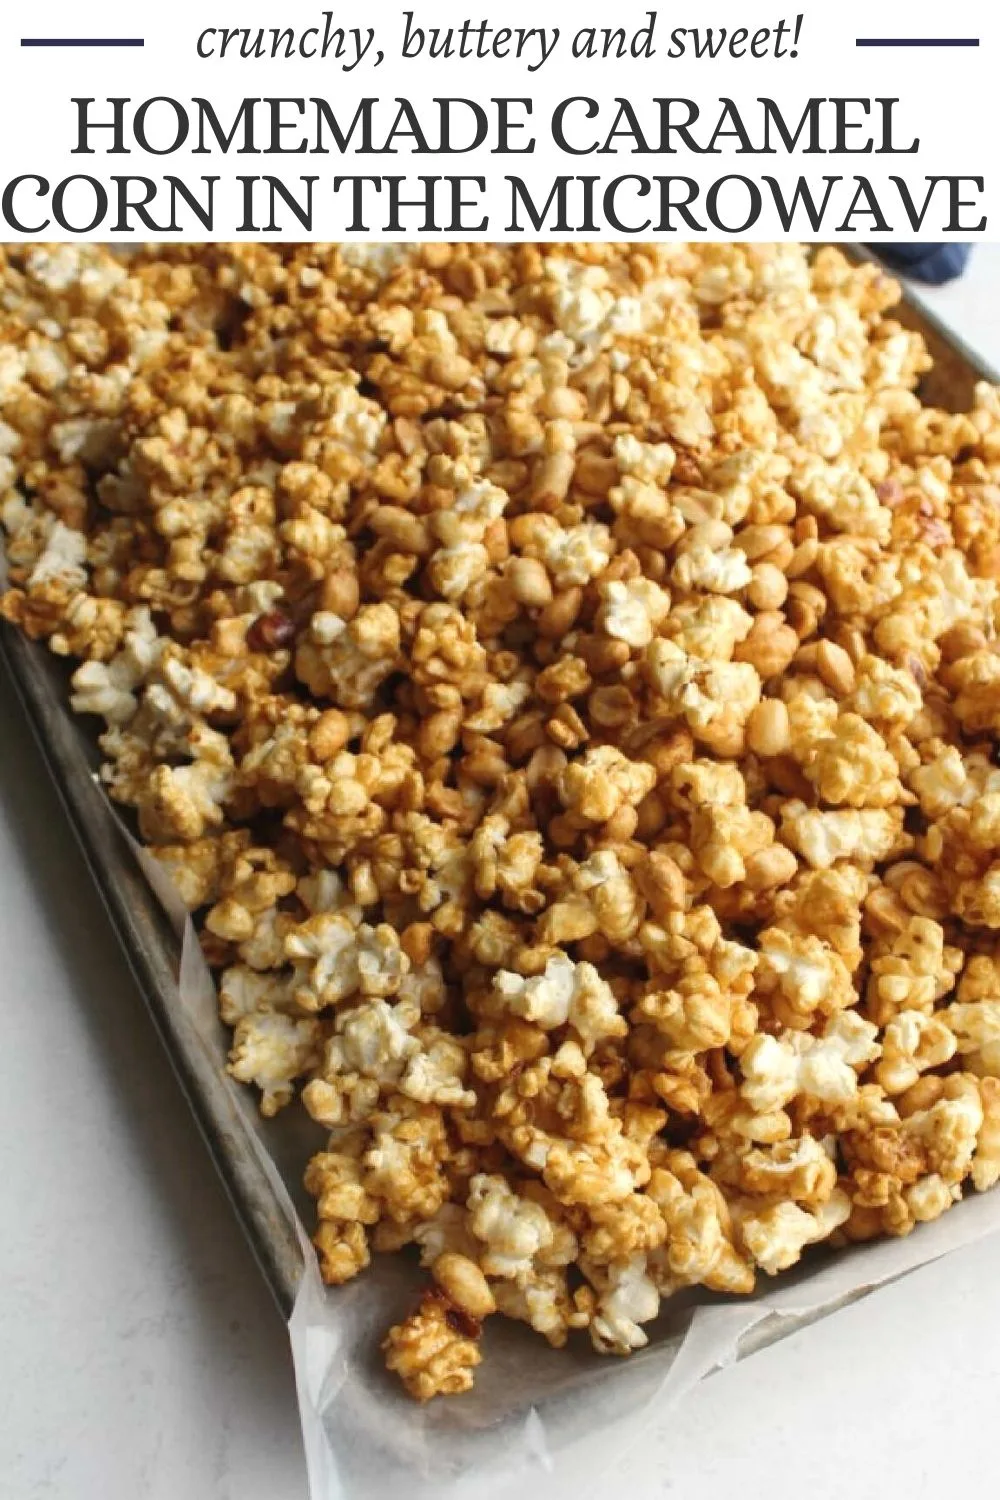 Making your own caramel corn doesn't have to be hard or time consuming. This recipe features a perfect buttery caramel coating for your popcorn that is set in the microwave. That makes the process fast and easy and the results are delicious!